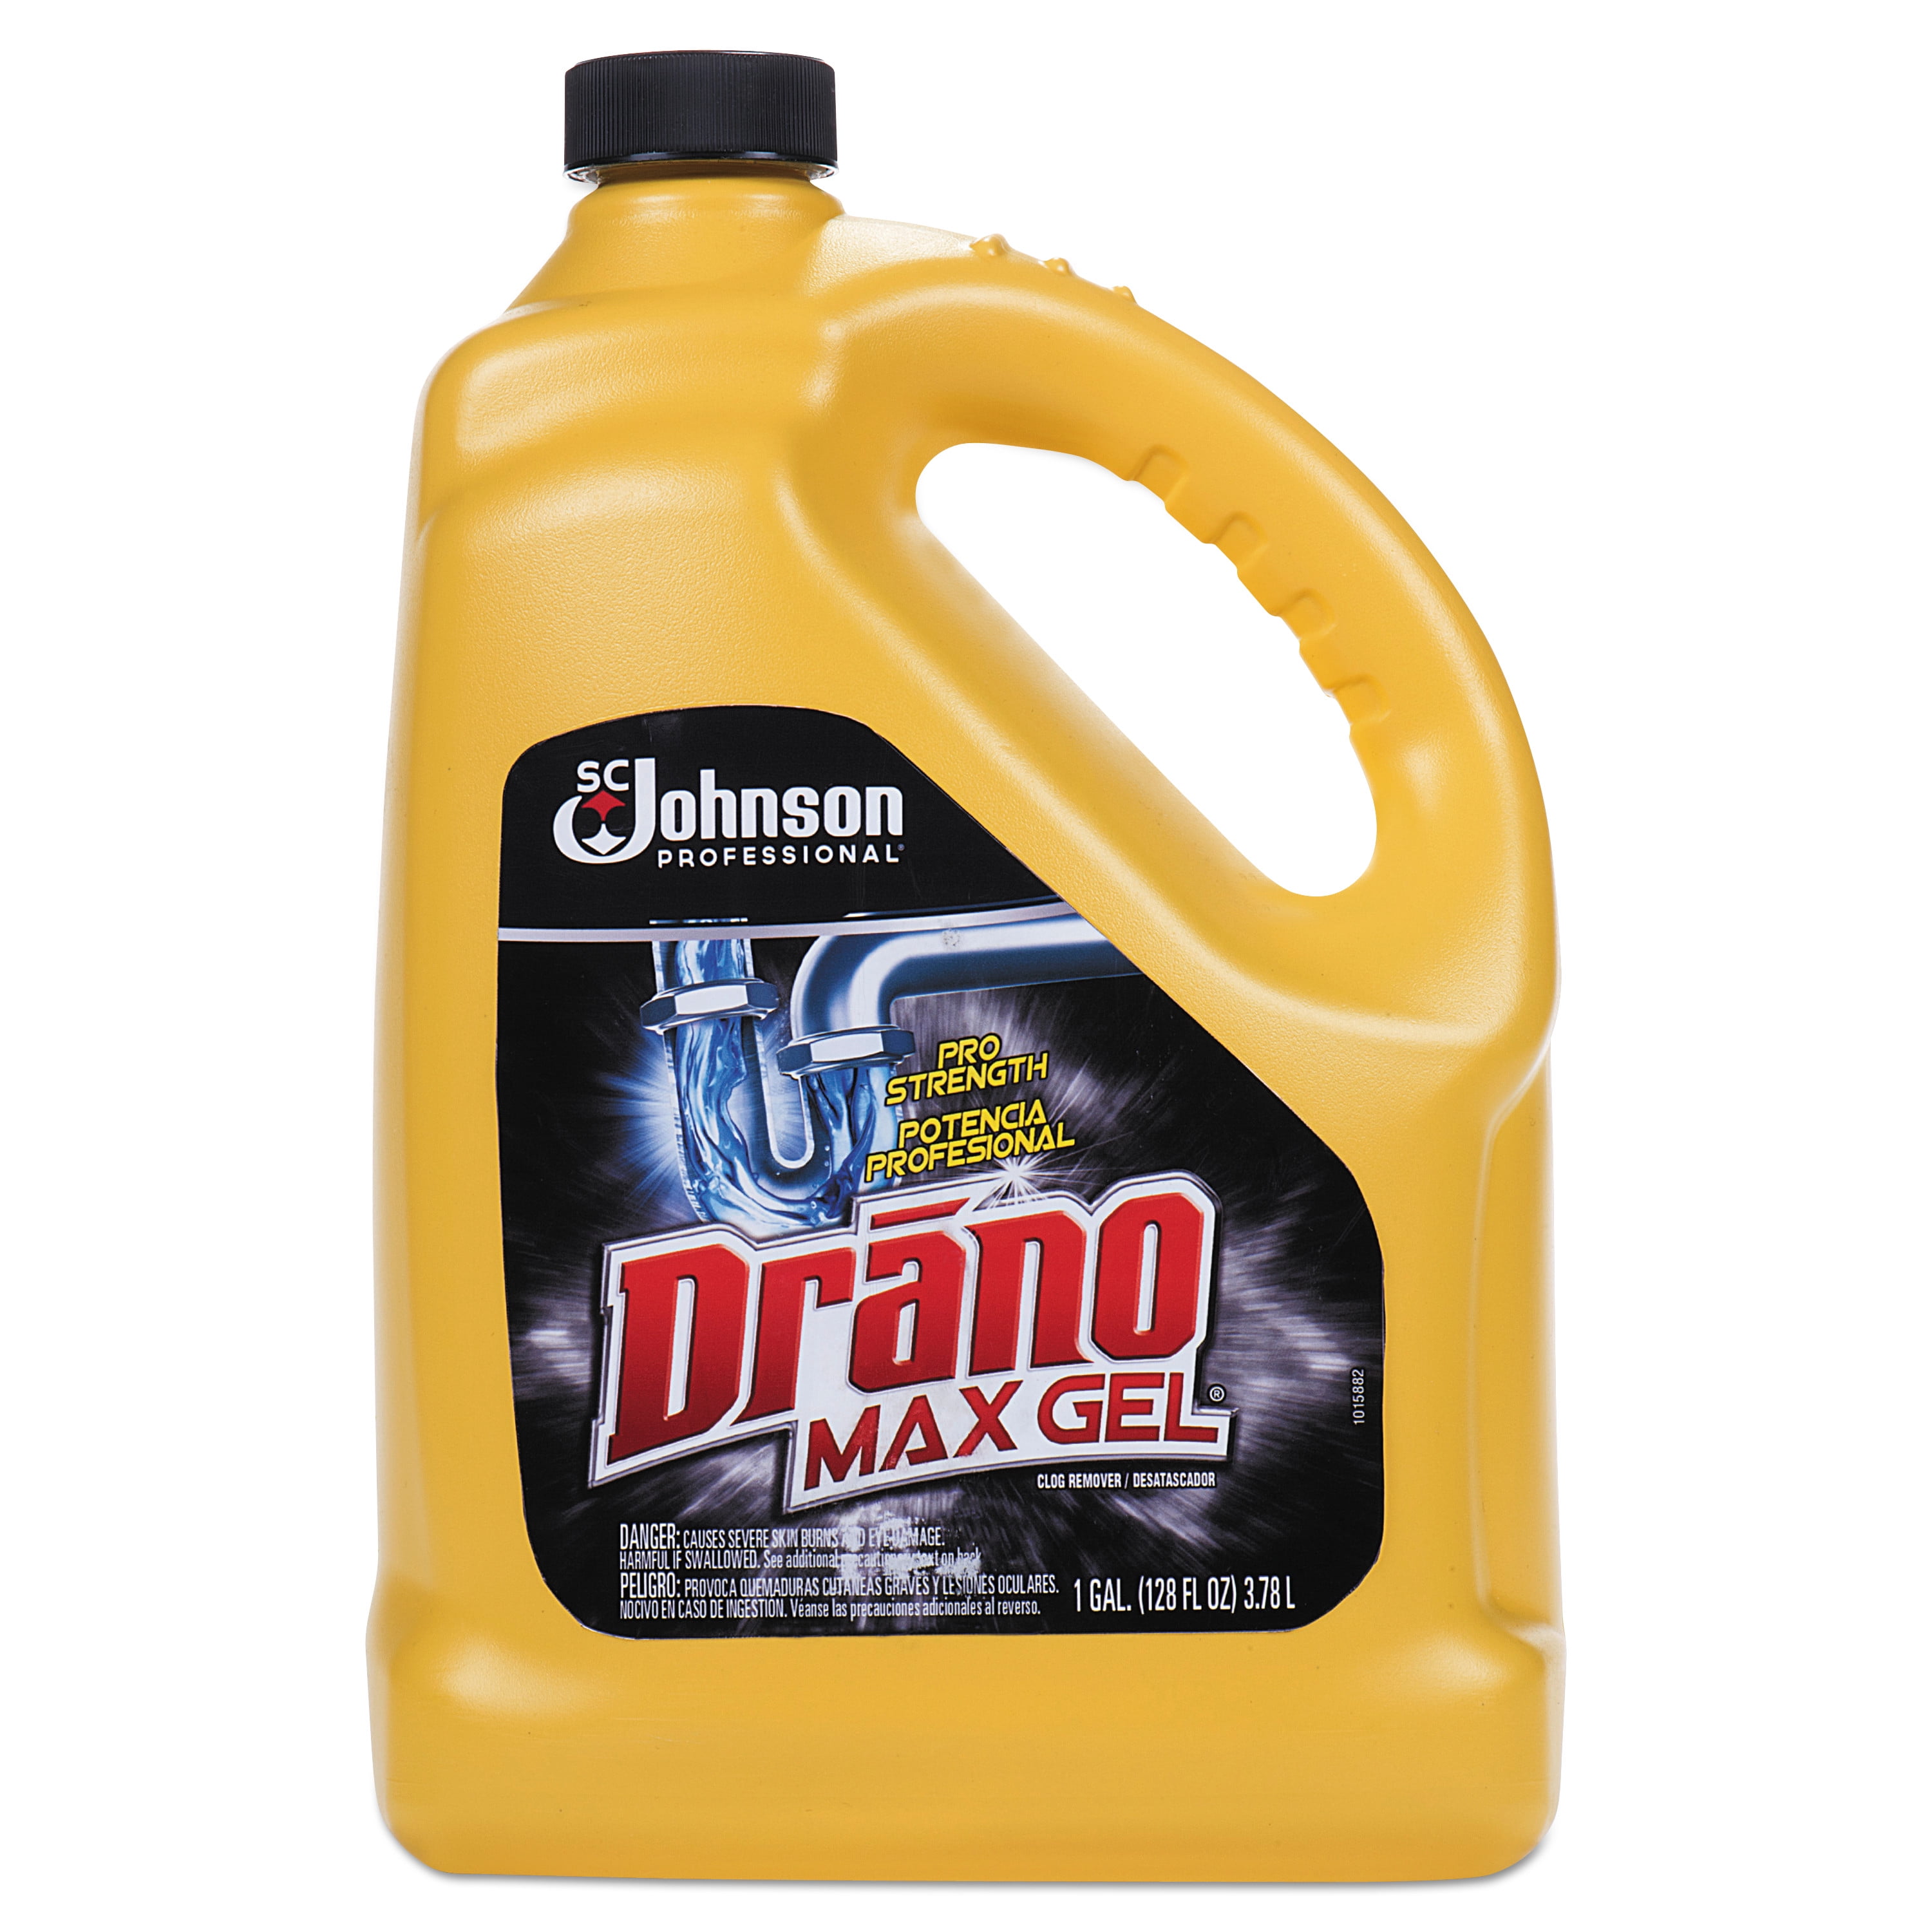 Drano Not Working? How to Remove Clogs When Drano Fails - Prudent Reviews